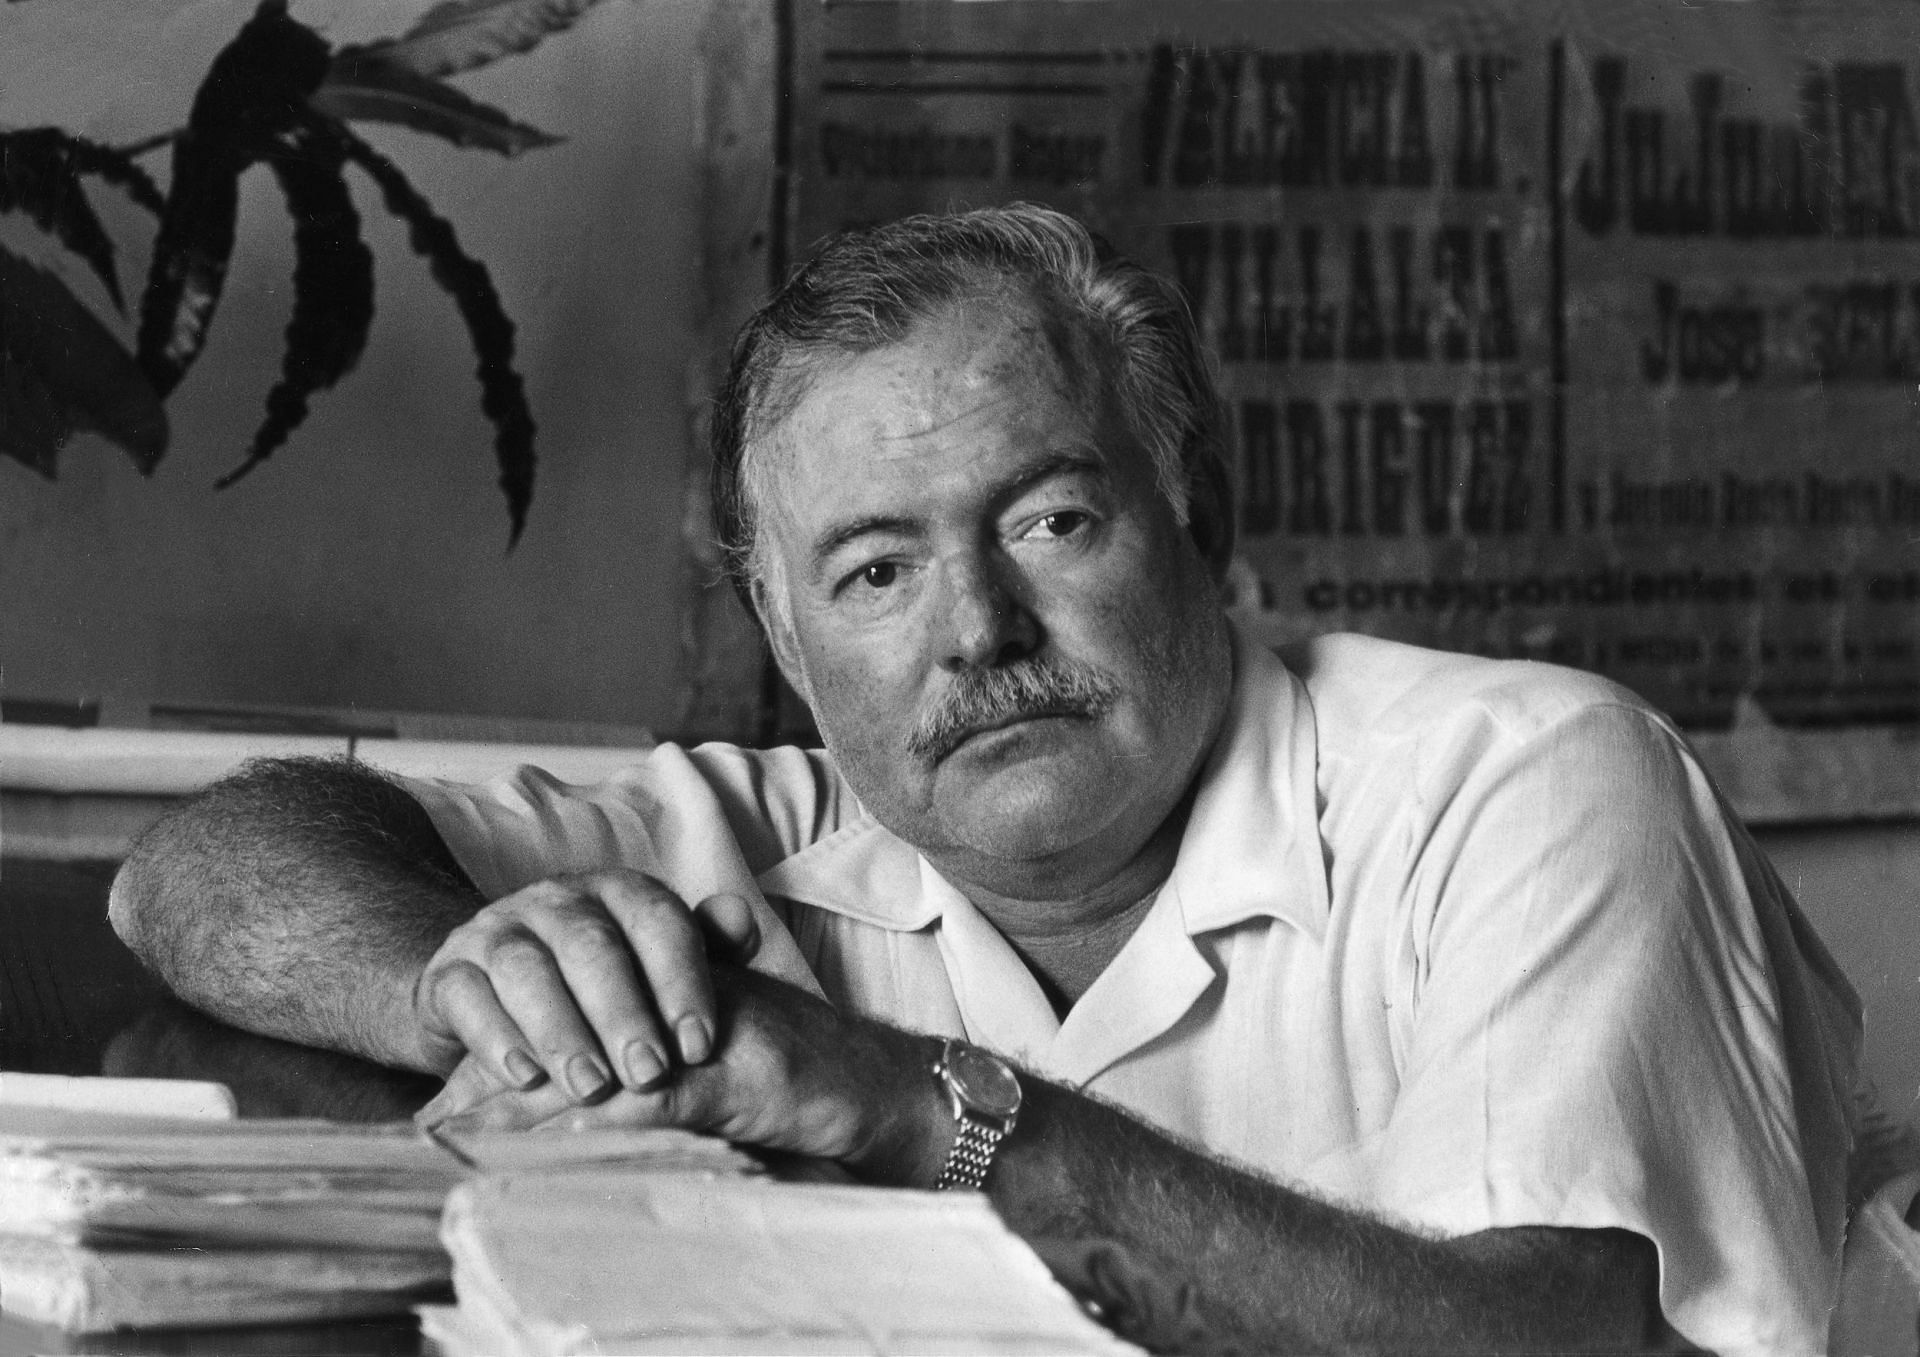 Ernest Hemingway, one of the most celebrated American novelist, 1952 (Image via Getty)